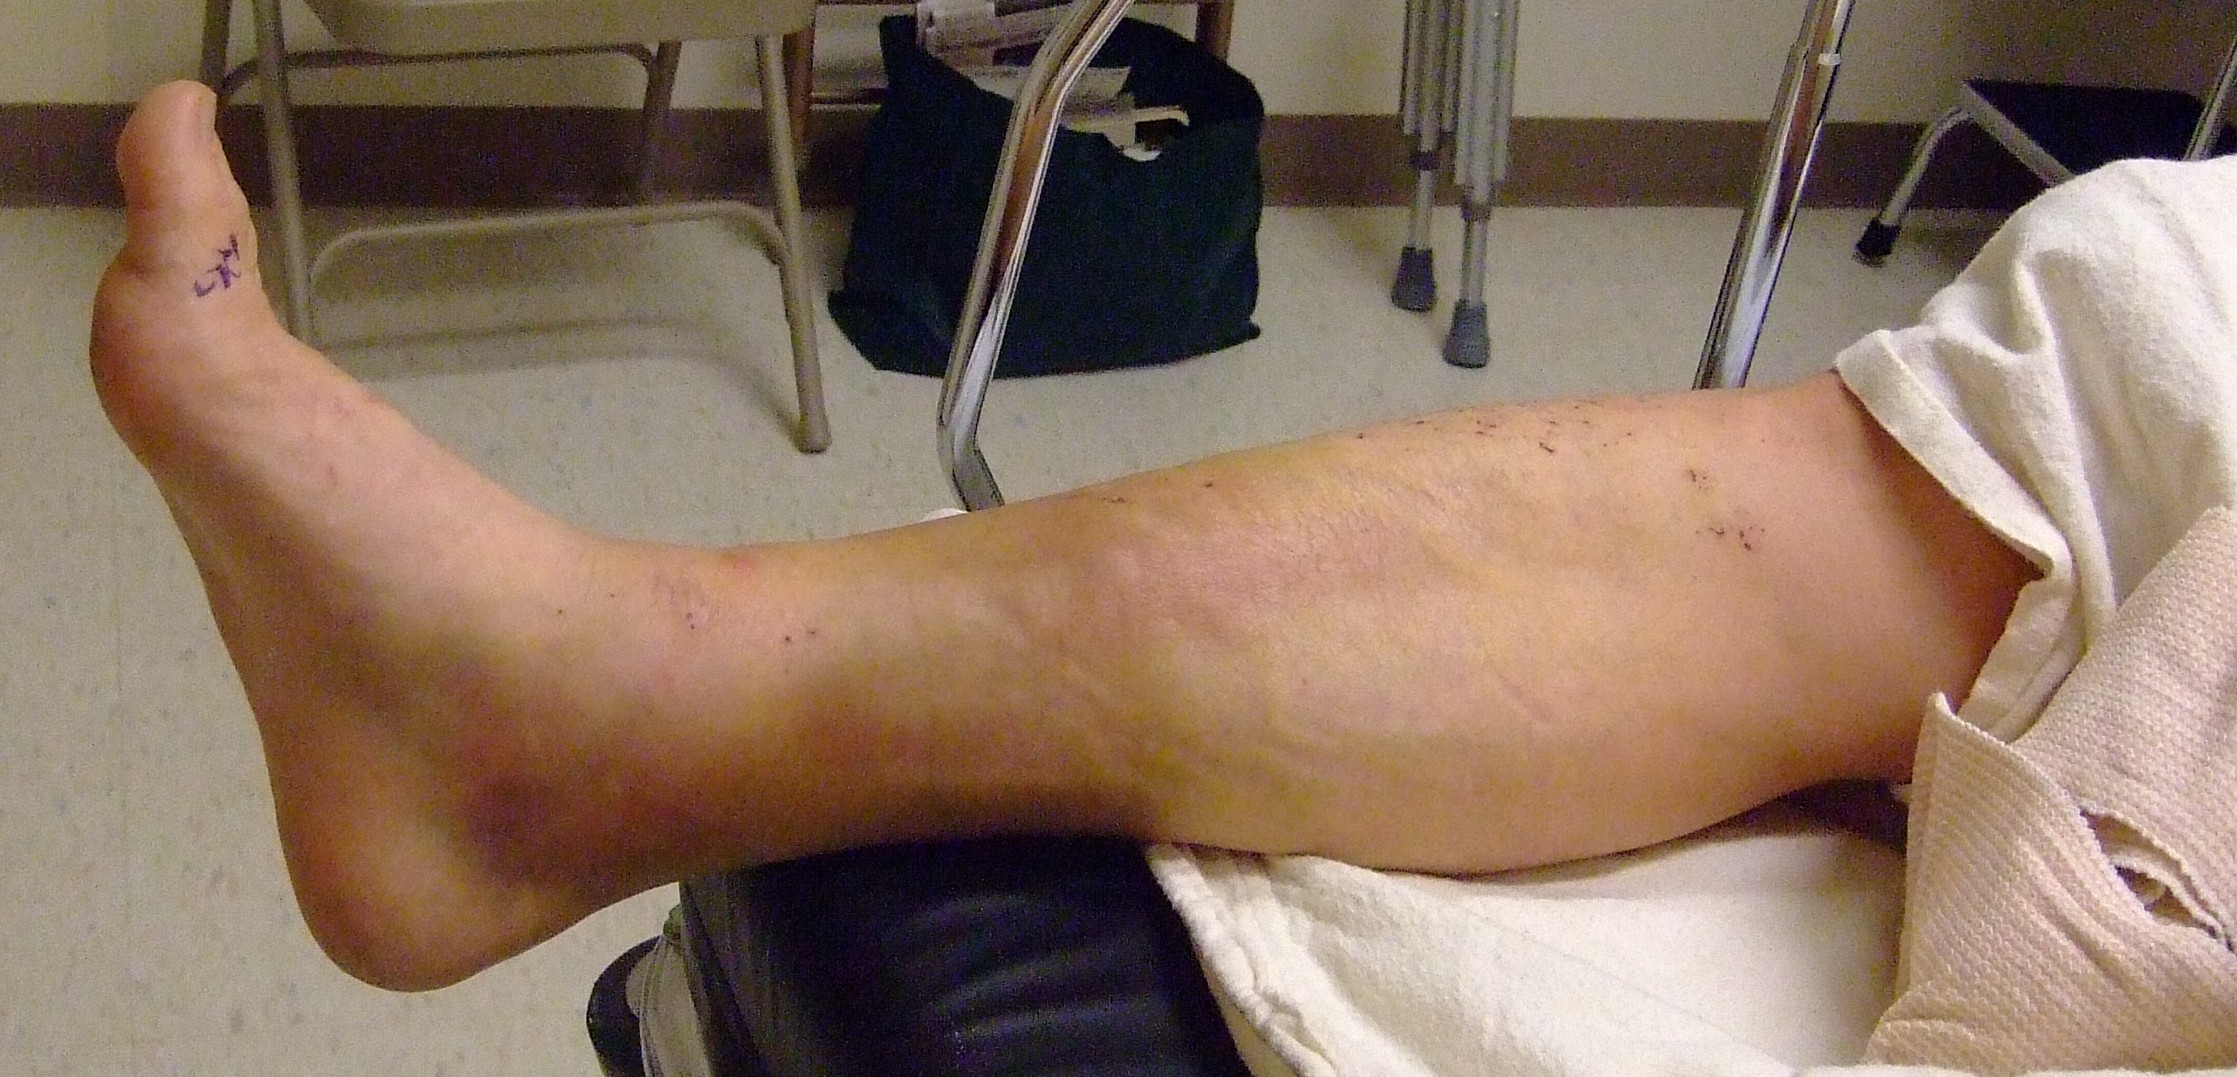 The leg before surgery